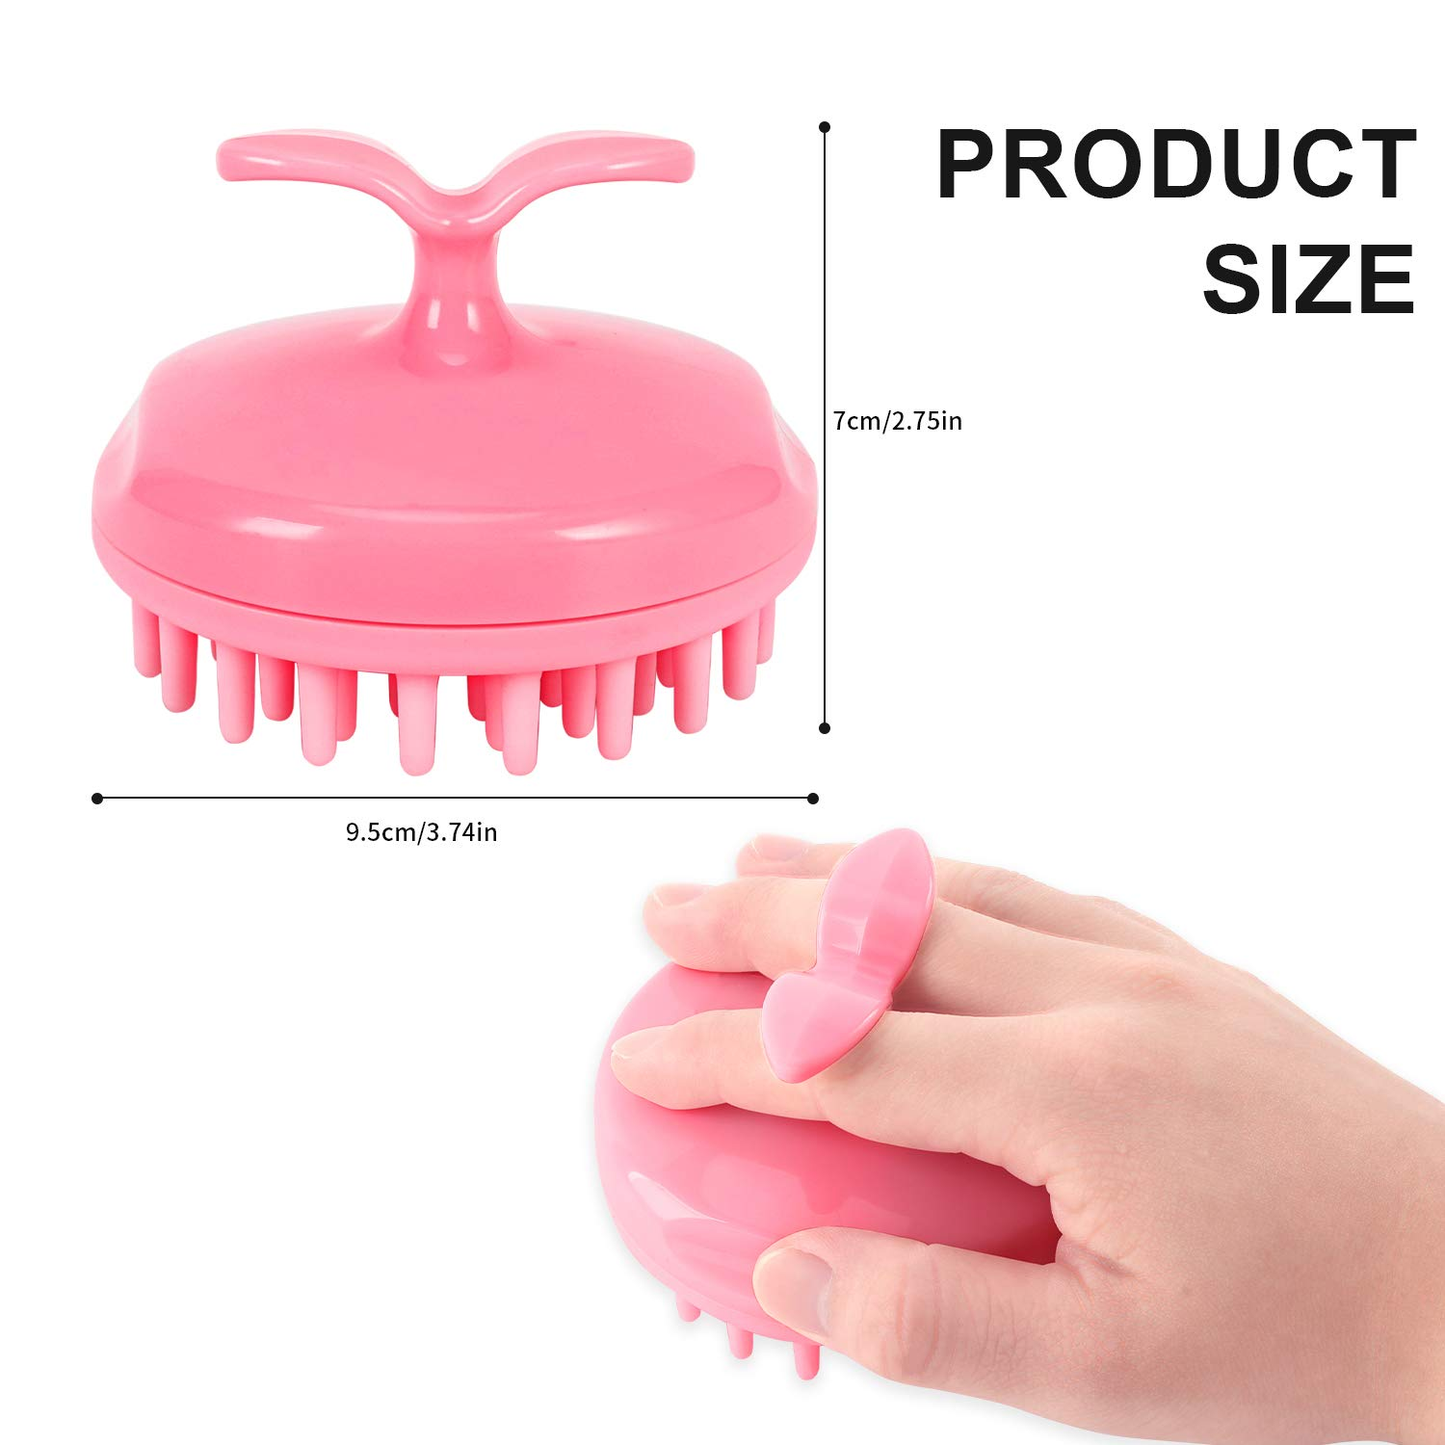 2 Pack Hair Scalp Massager Shampoo Brush, Handheld Scalp Care Hair Brush with Soft Silicone, Shower Scalp Massager, Comfortable Head Scrubber for All Hair Types.